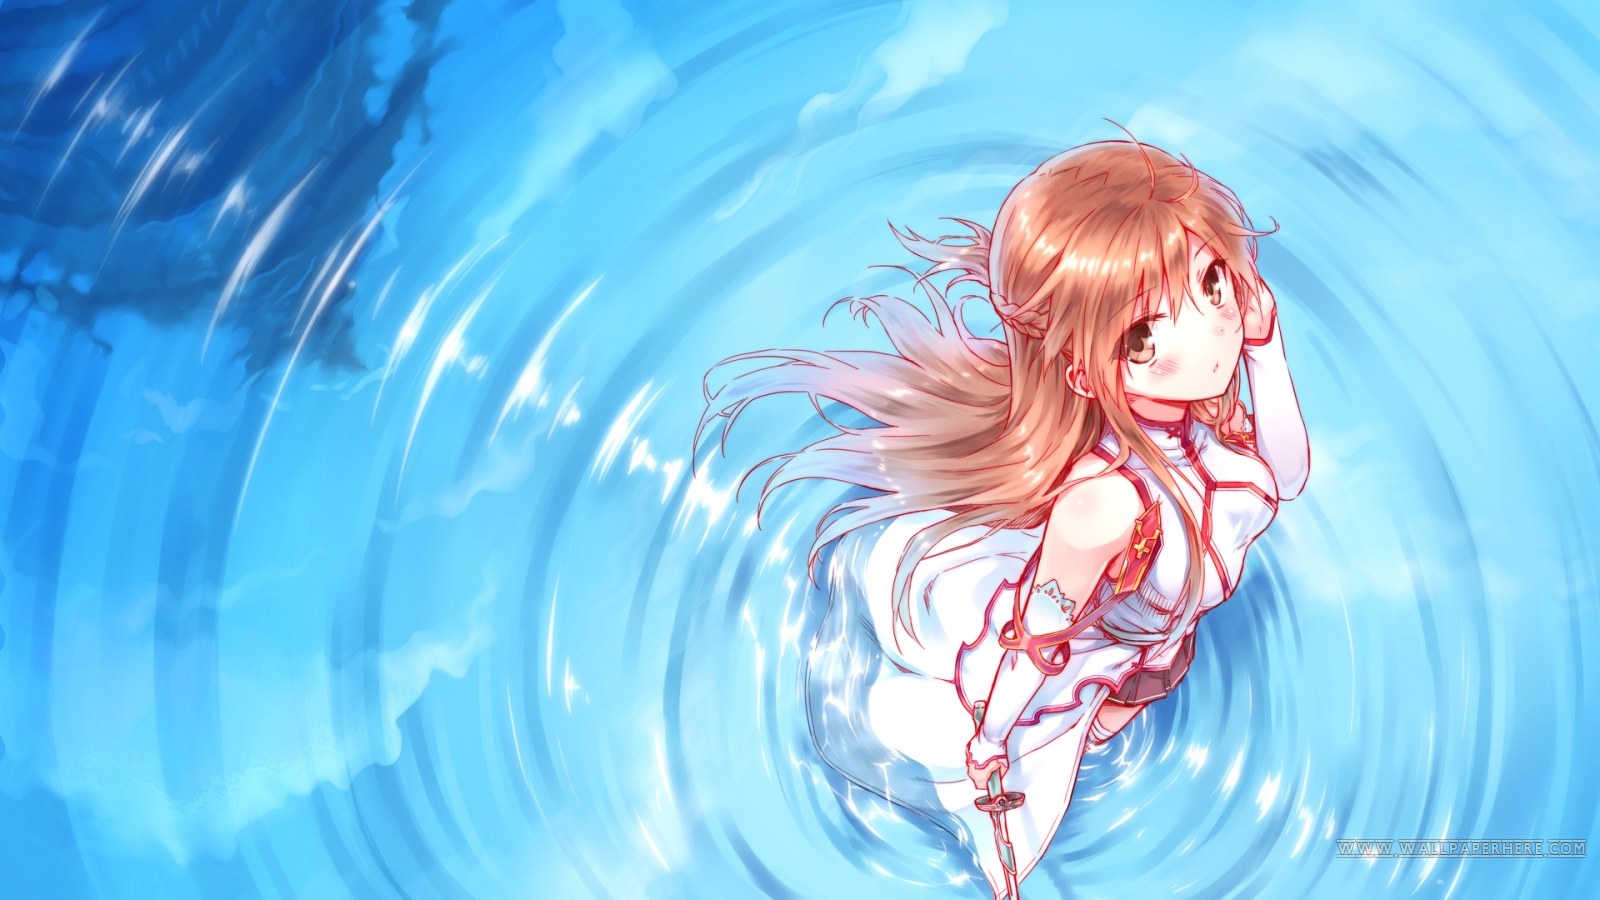 Asuna 16 Wallpapers | Your daily Anime Wallpaper and Fan Art